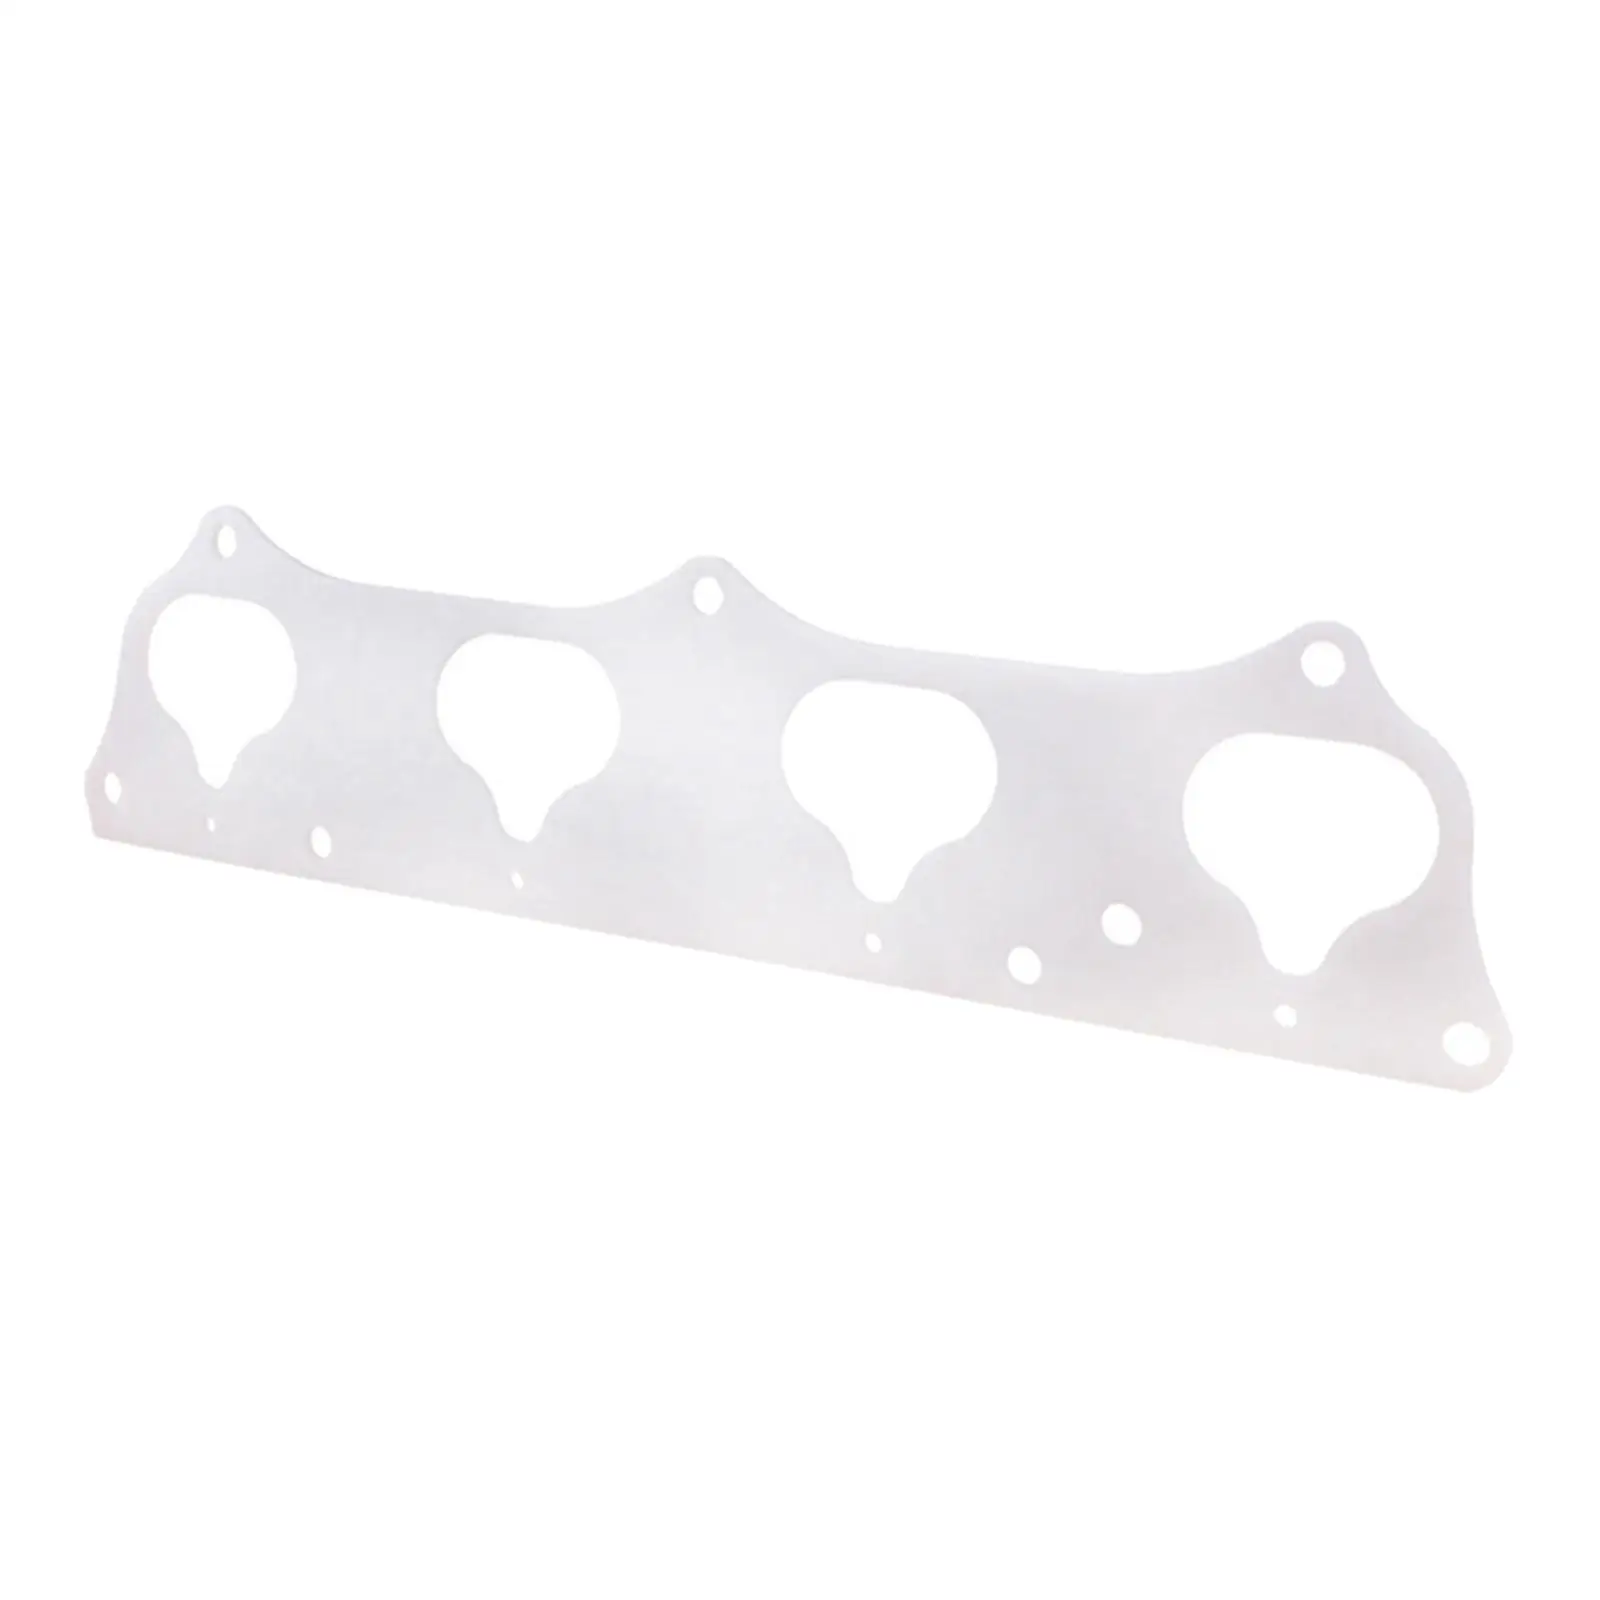 Intake Manifold Gasket High Performance Durable Premium Accessories Spare Parts Replacement for Swap K20A/A2/A3/Z1 K-series